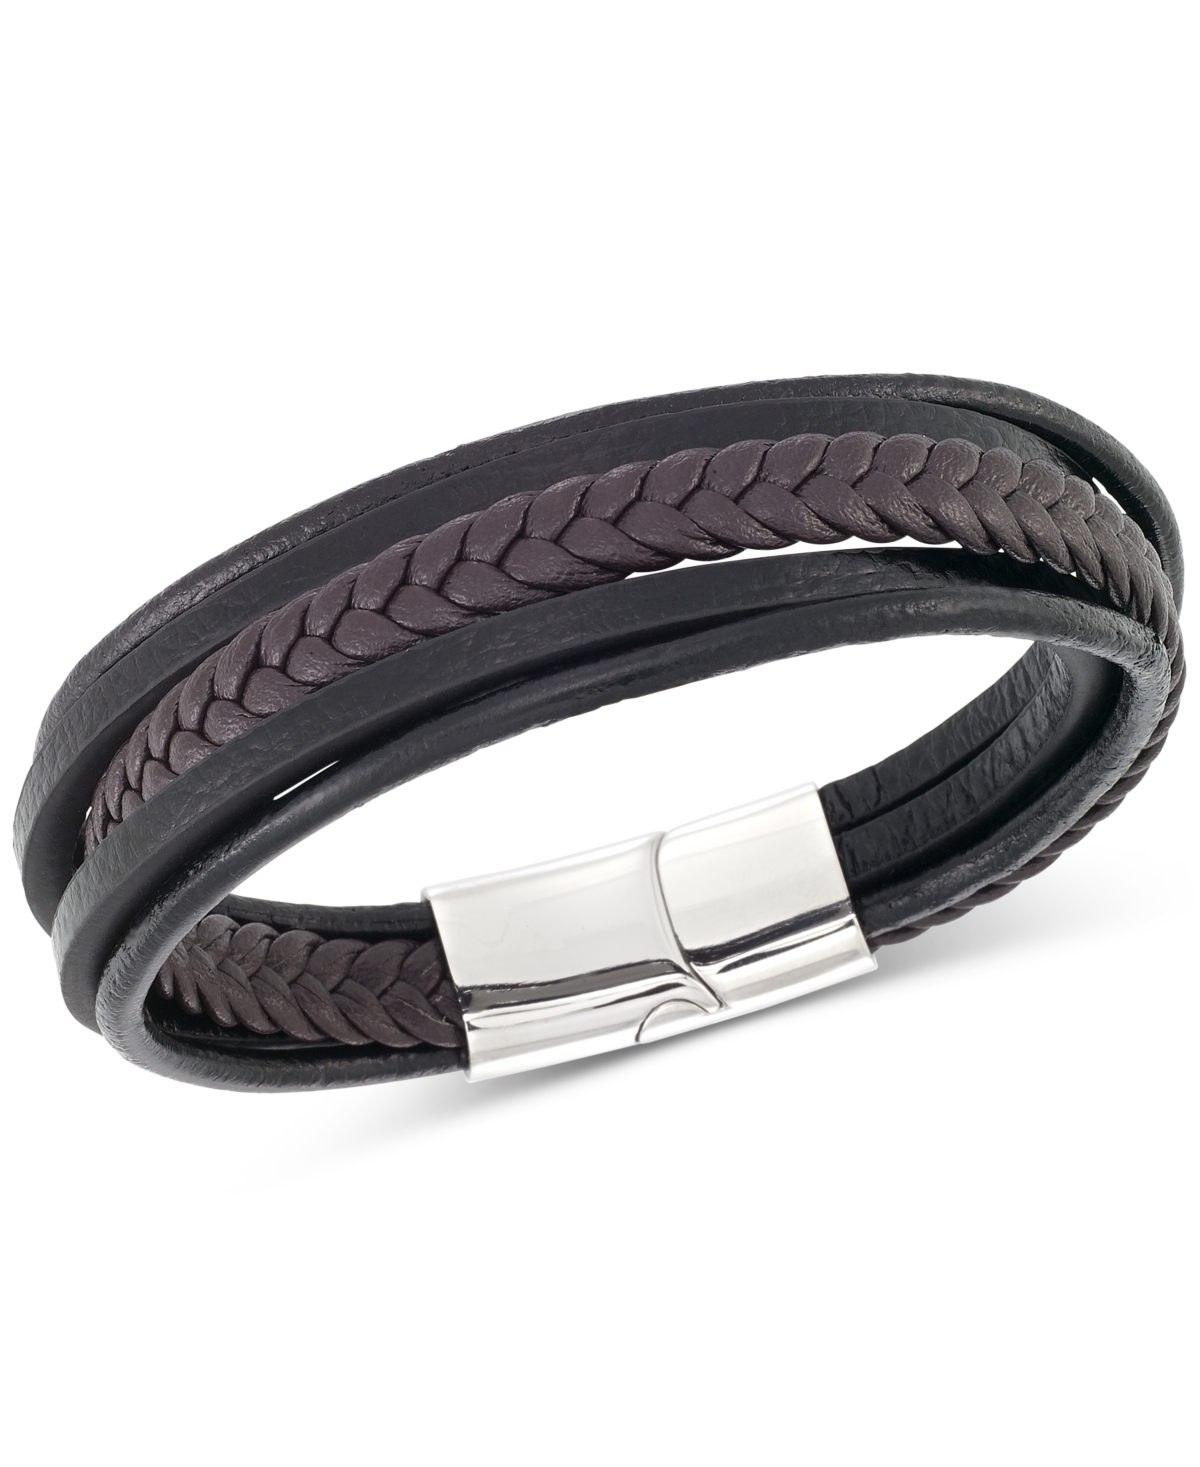 Legacy for Men by Simone I. Smith Men's Black & Brown Multi-Row Leather Bracelet in Stainless Steel